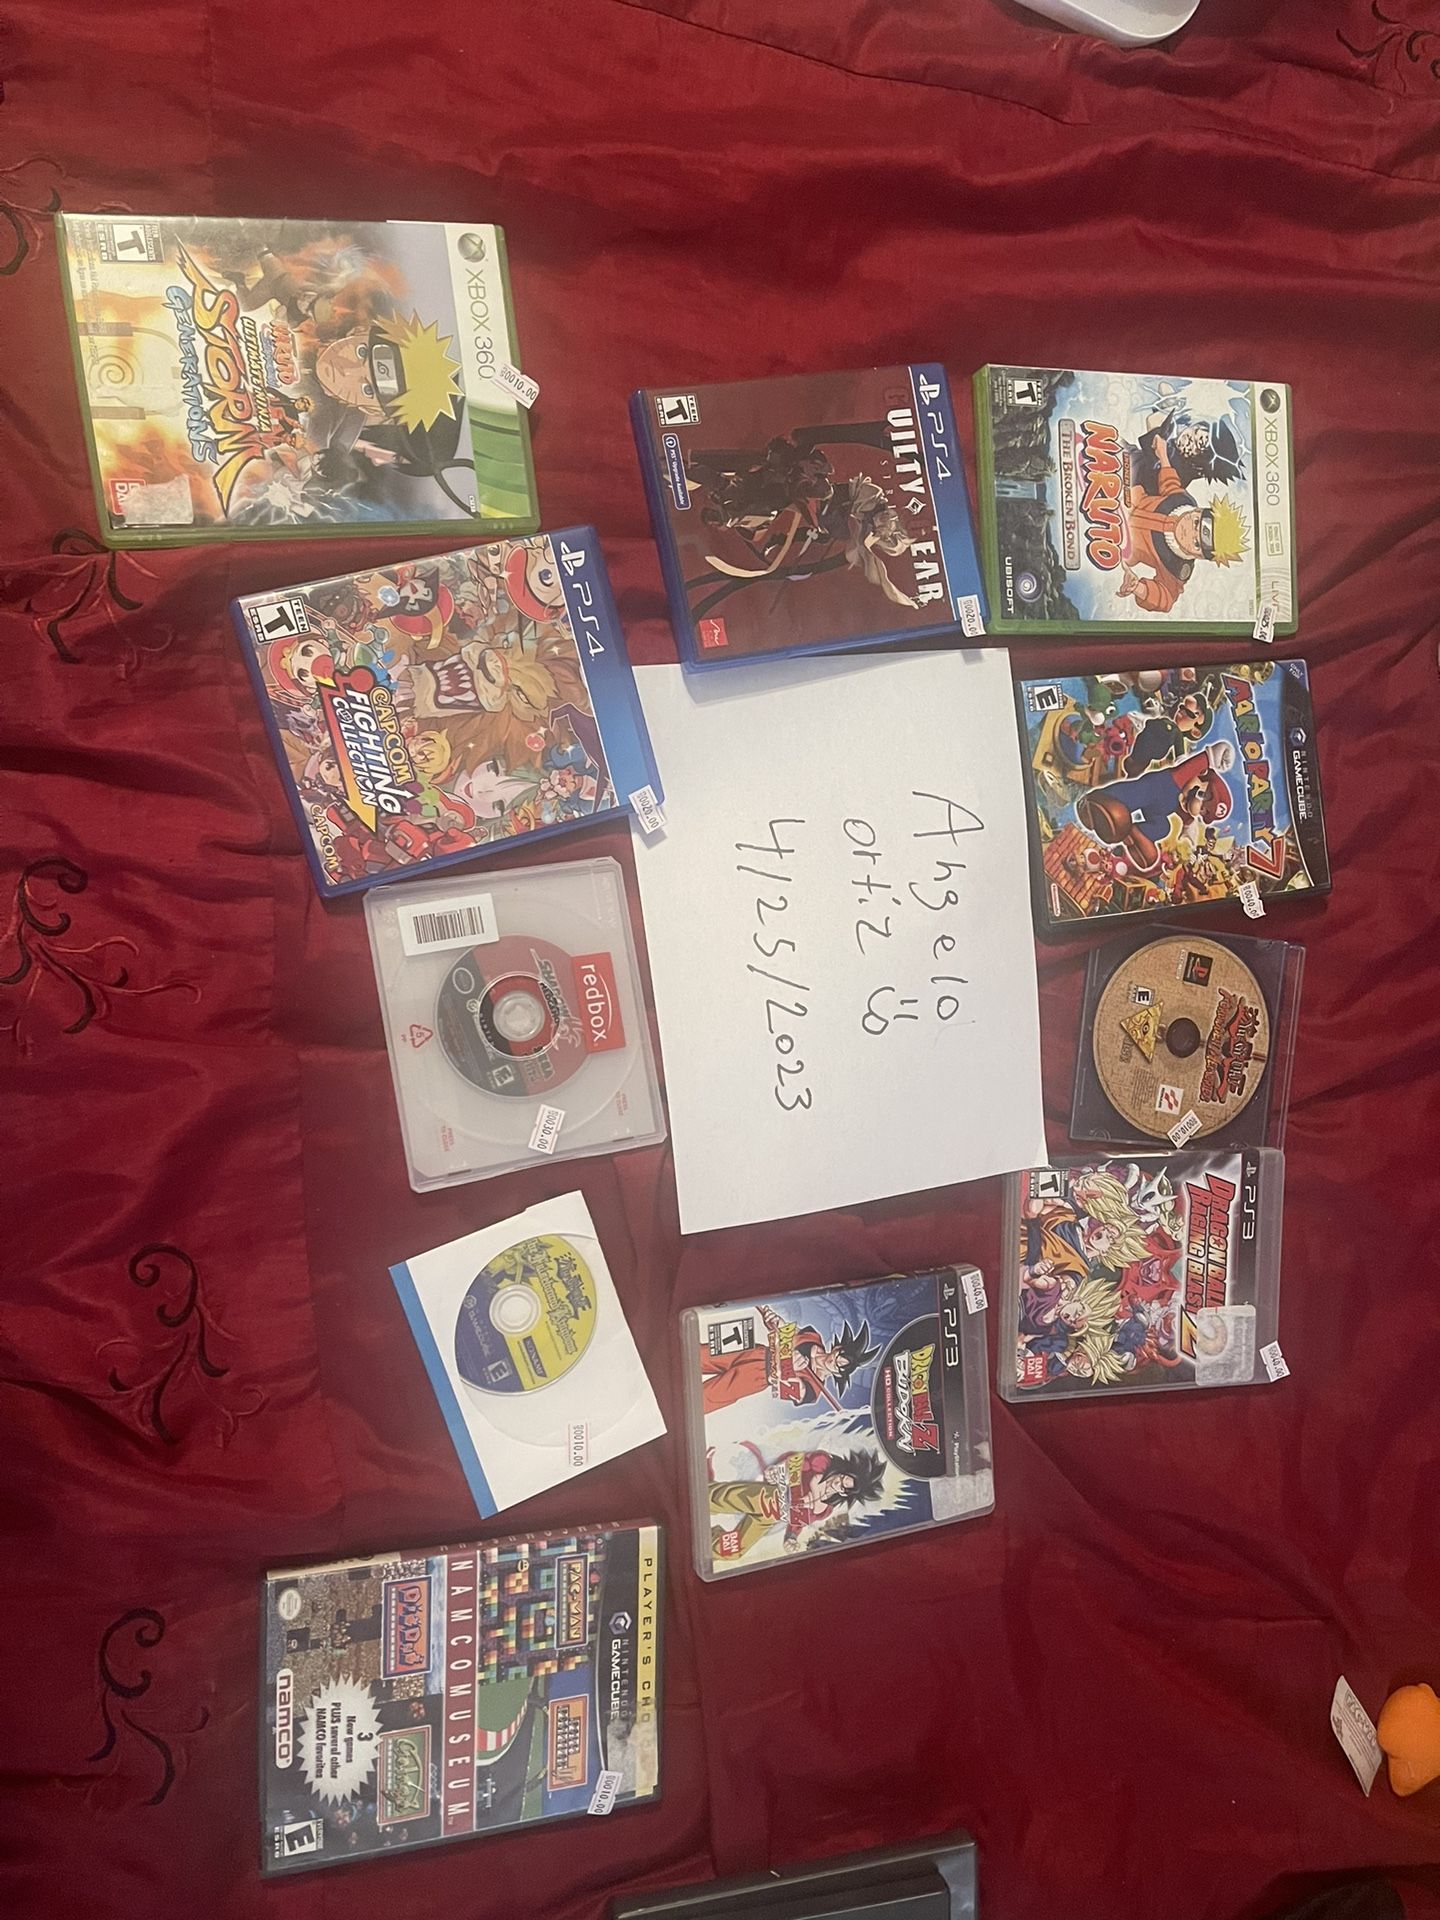 GameCube Ps4 Xbox 360 And PS3 Games